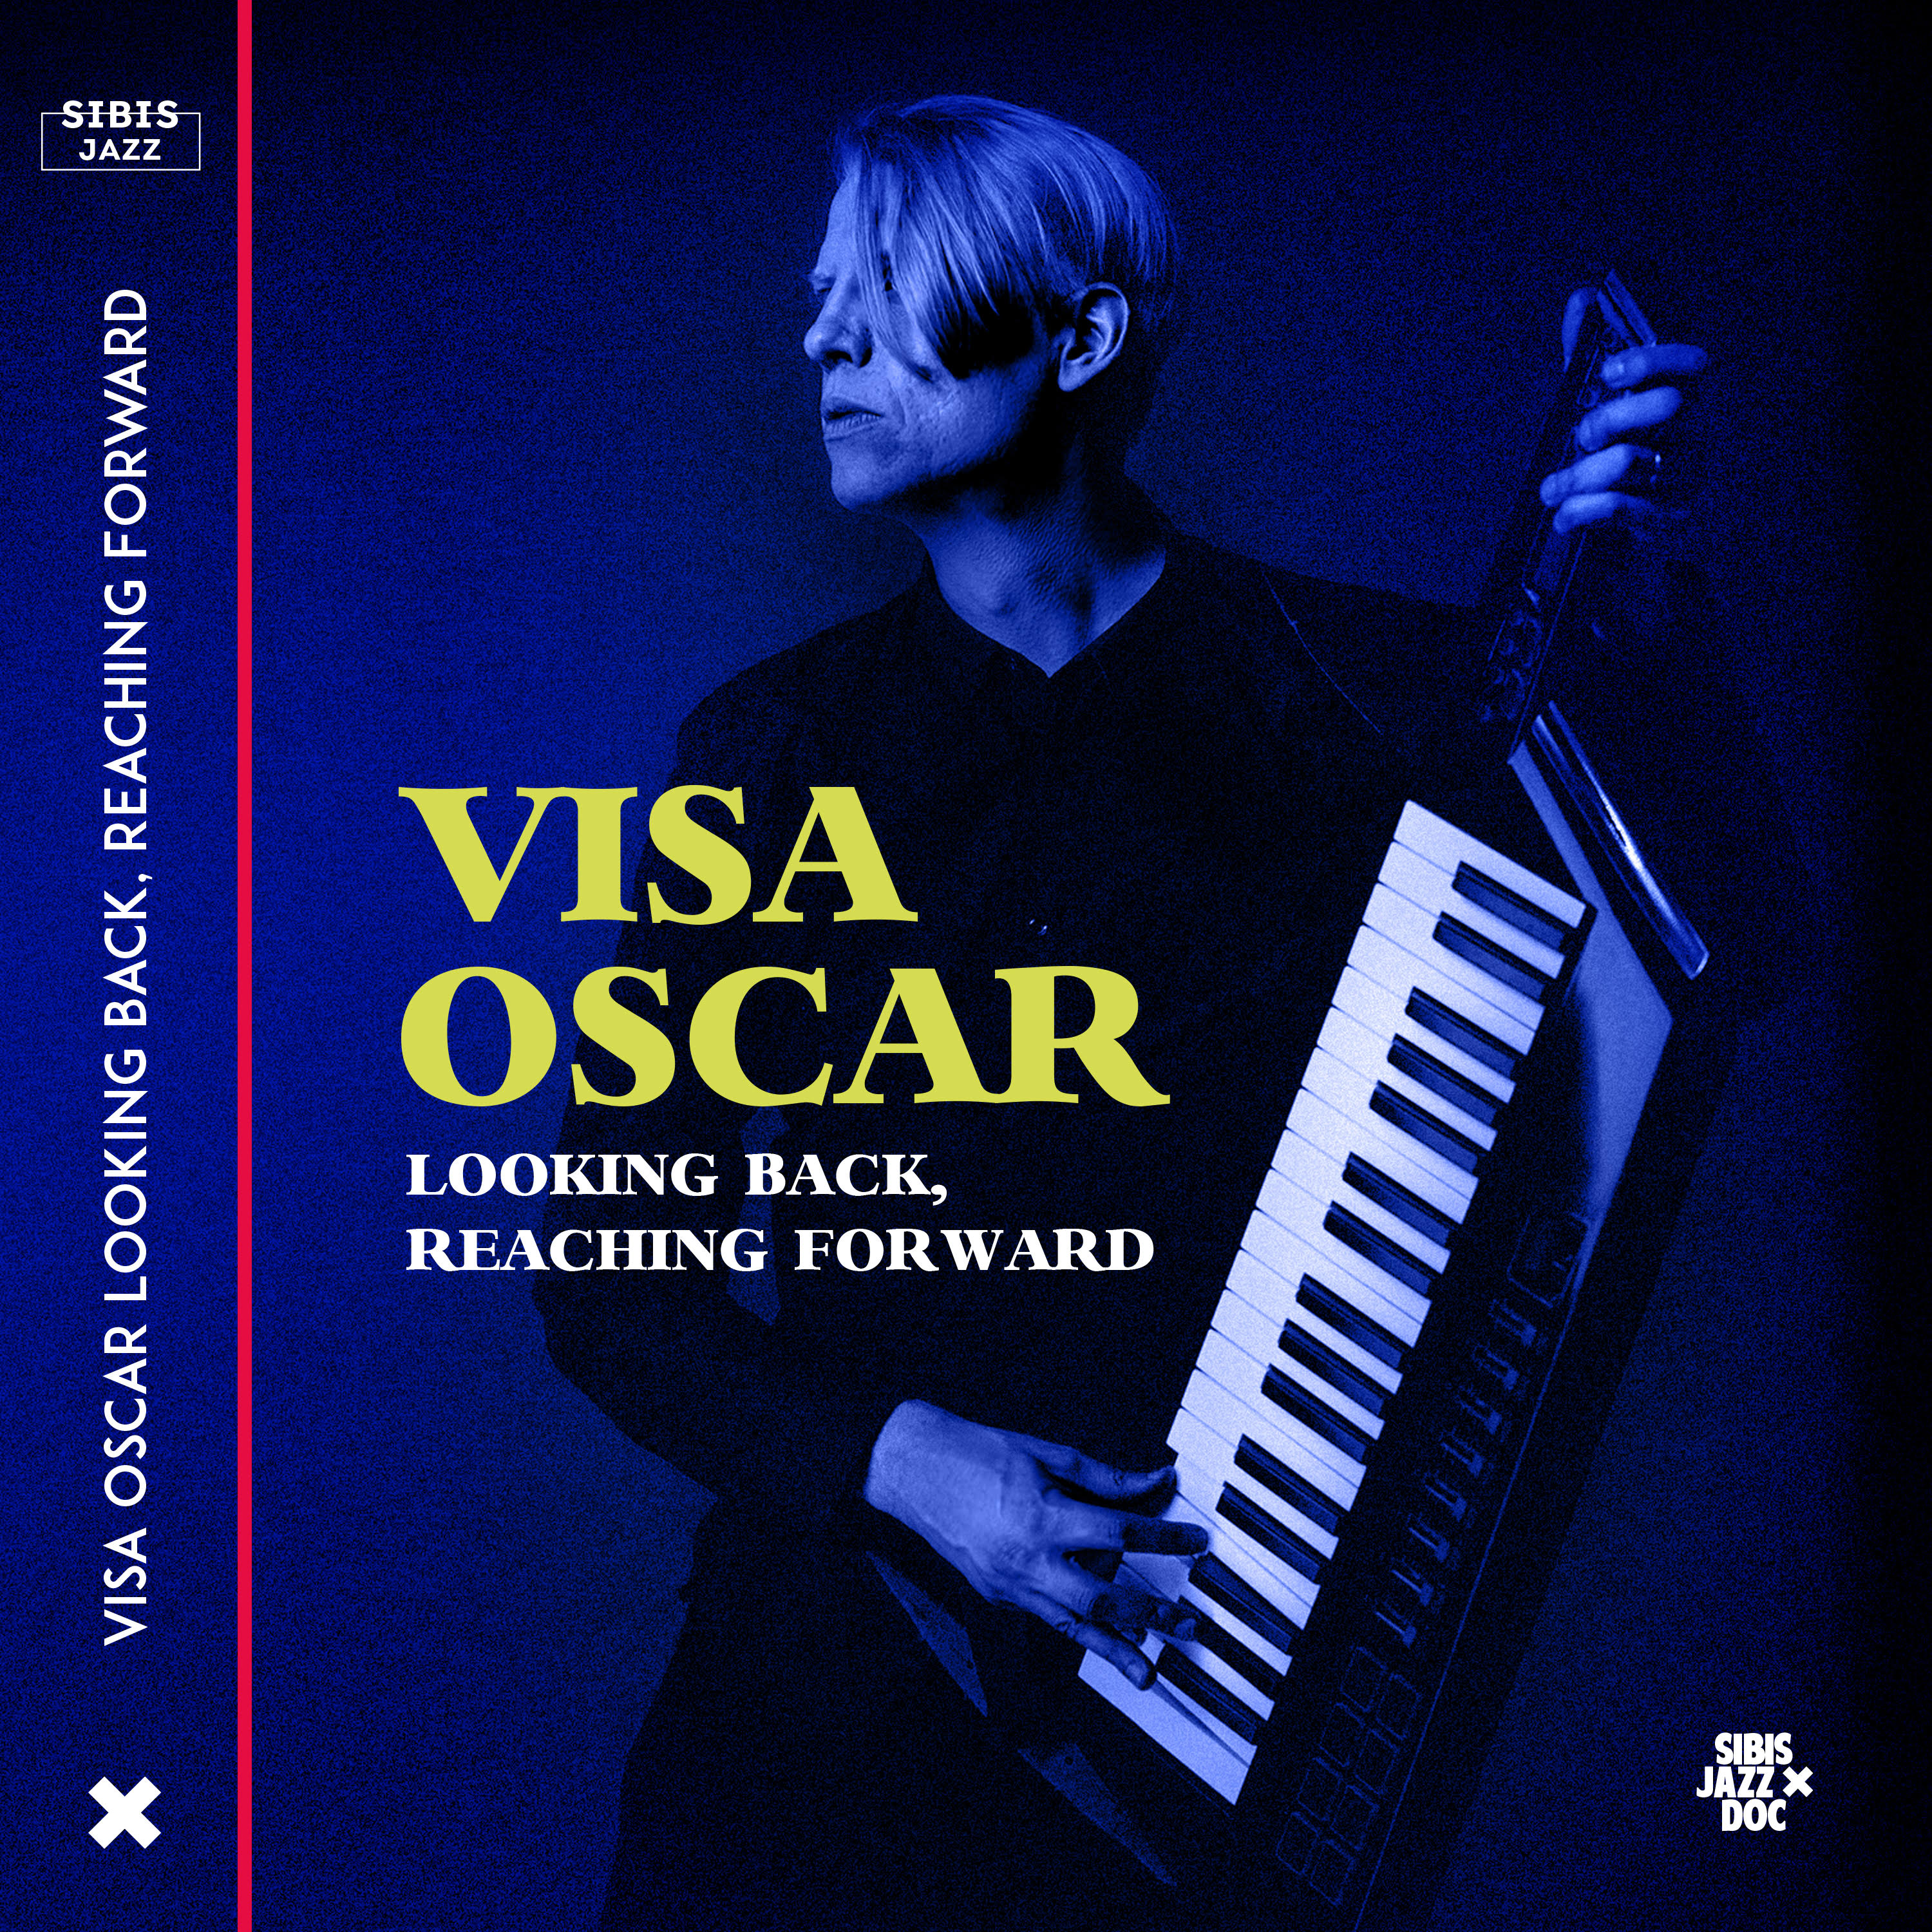 Blue album cover by Visa Oscar: Looking back, reaching forward. Man playing electric piano in blue light. 